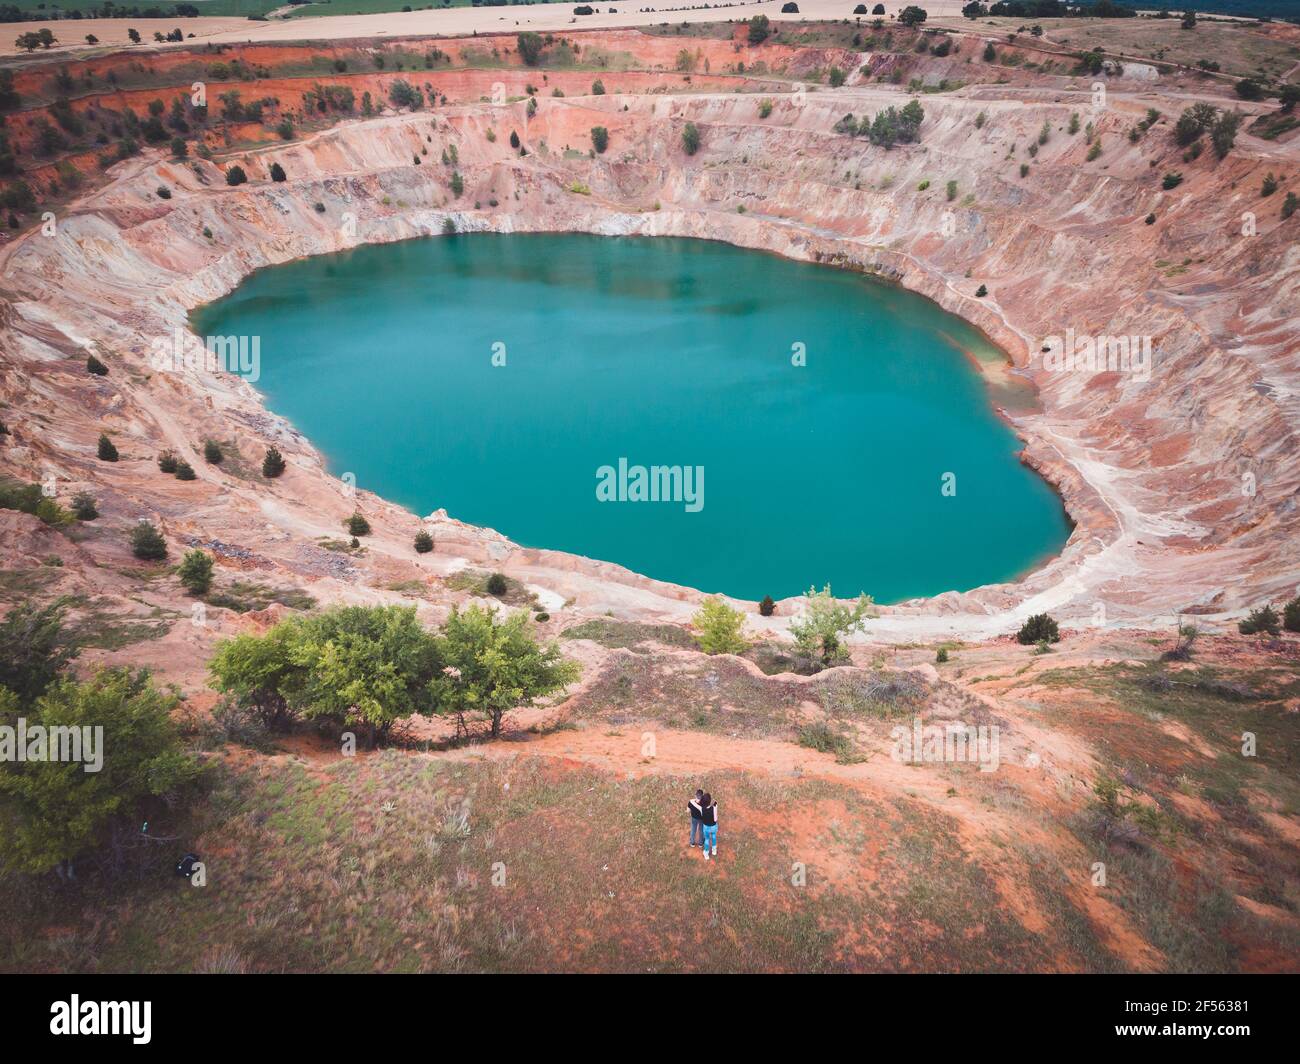 Aerial view of couple on travel adventure at abandoned open mine pit Stock Photo